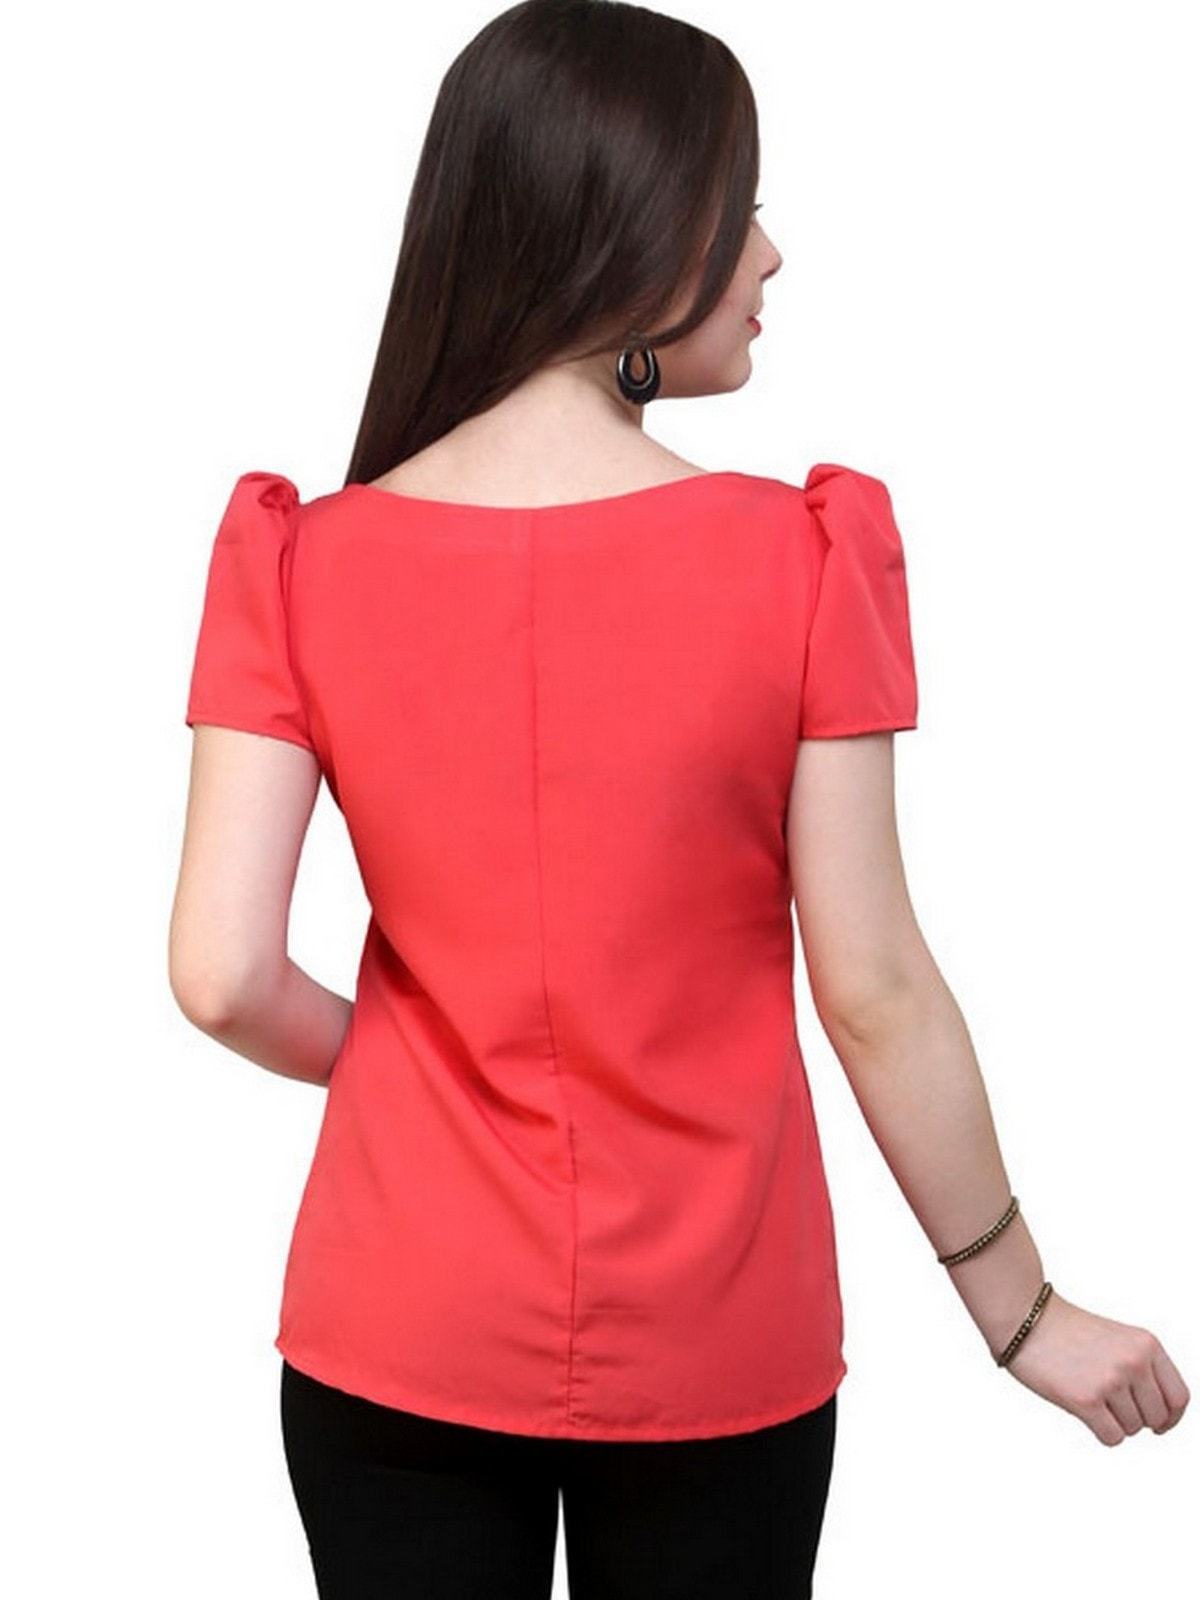 Women's Coral Top Detailed With Gathered Sleeves And Diagonal Zip - Pannkh